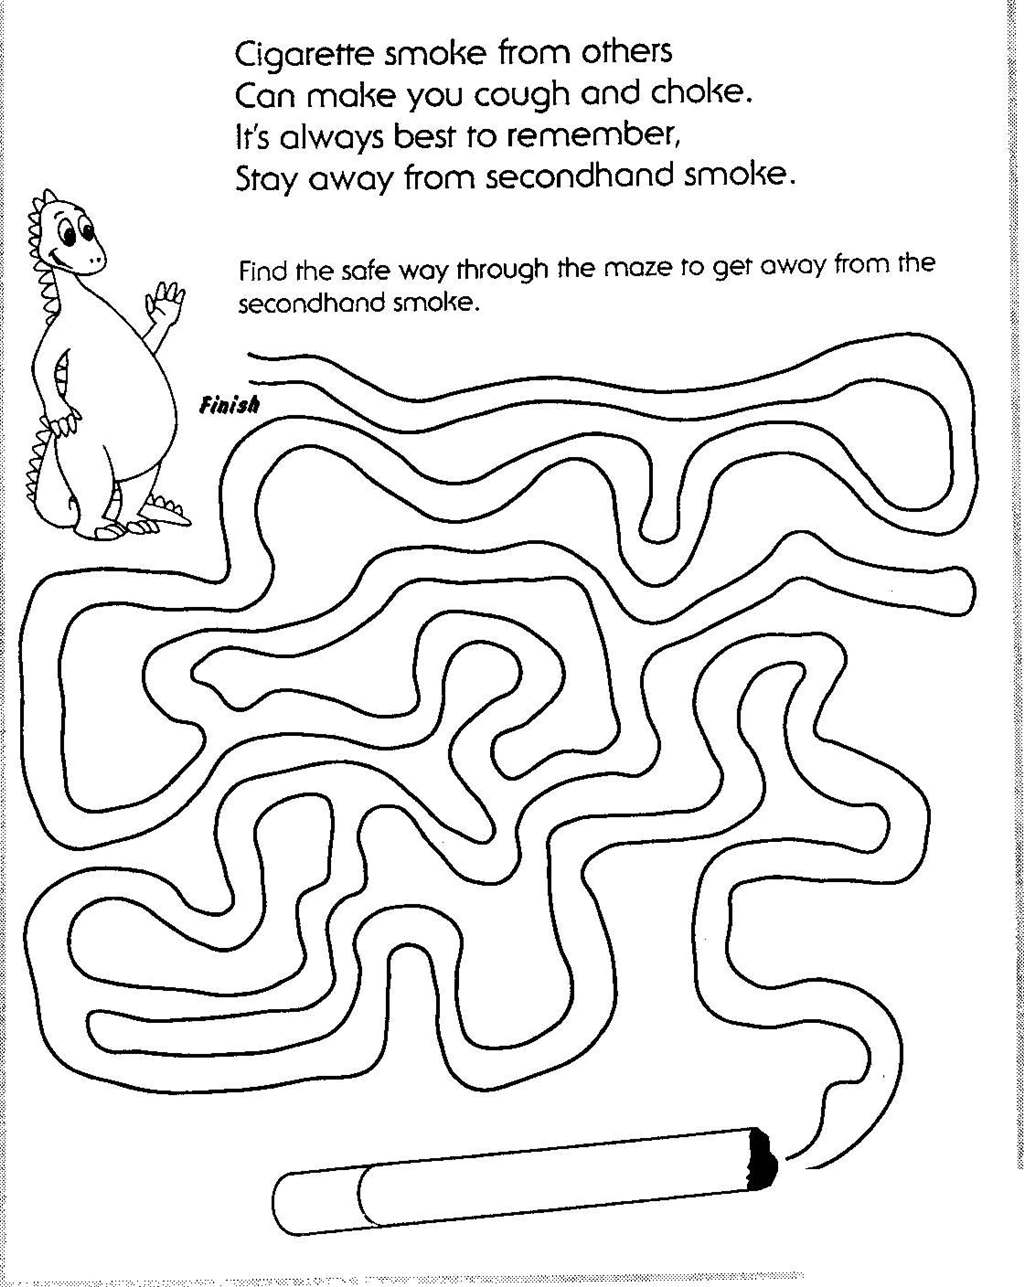 Free Drug Free Coloring Pages Cigarette Maze printable